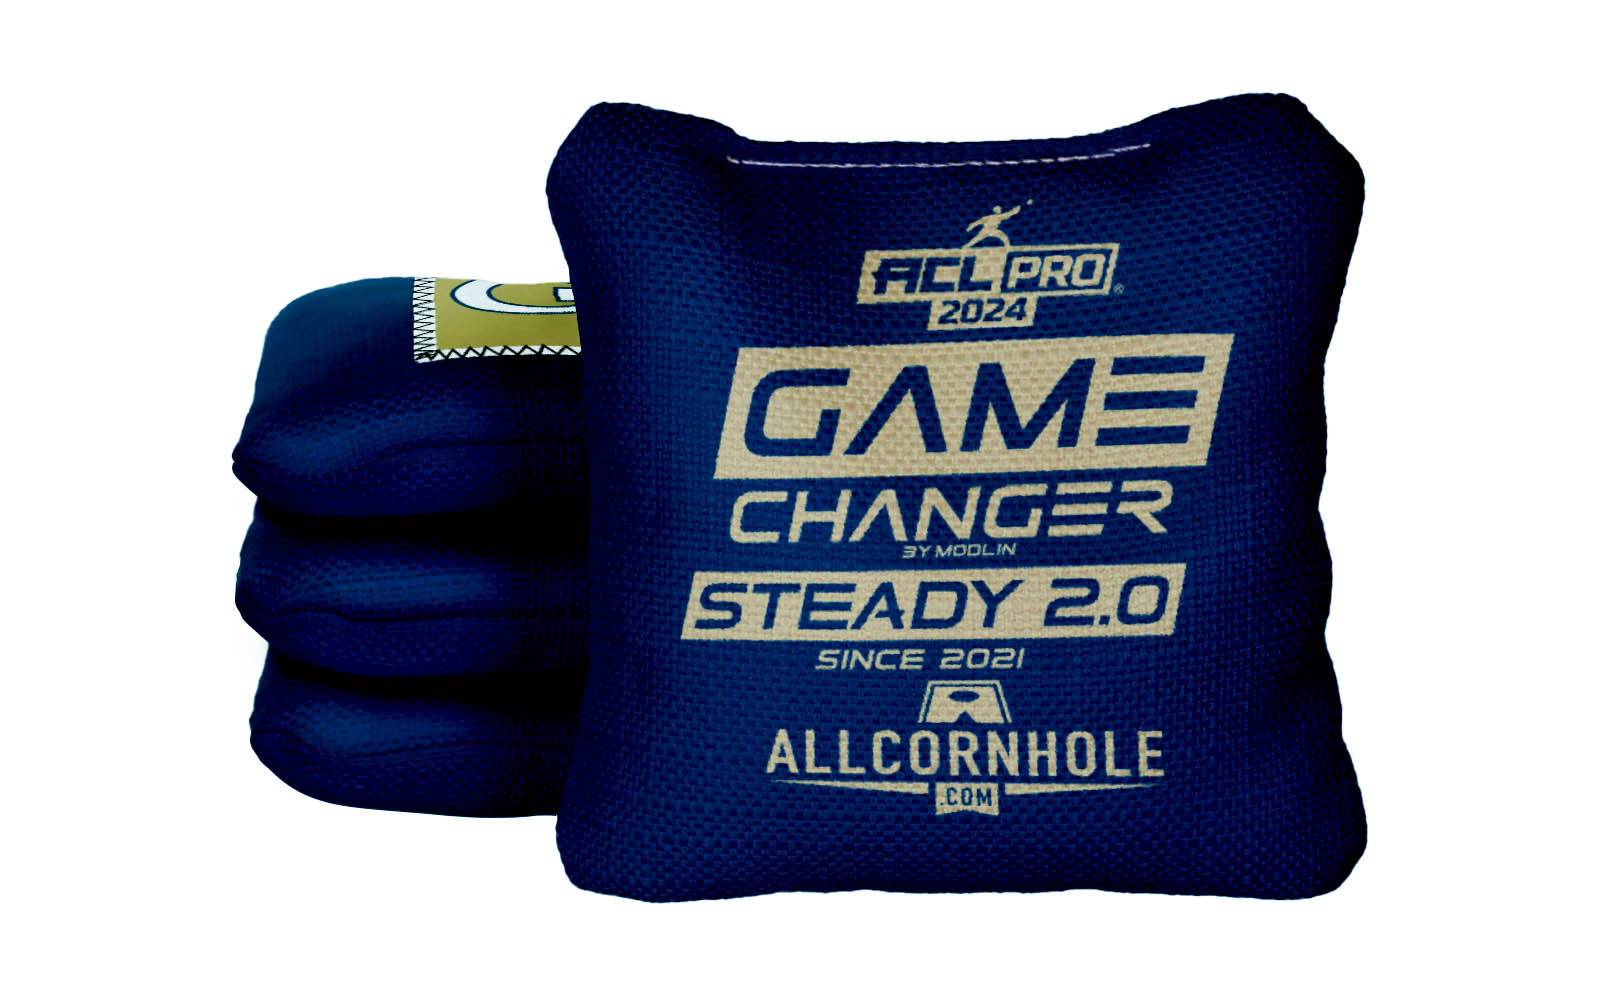 Officially Licensed Collegiate Cornhole Bags - AllCornhole Game Changers Steady 2.0 - Set of 4 - Georgia Tech